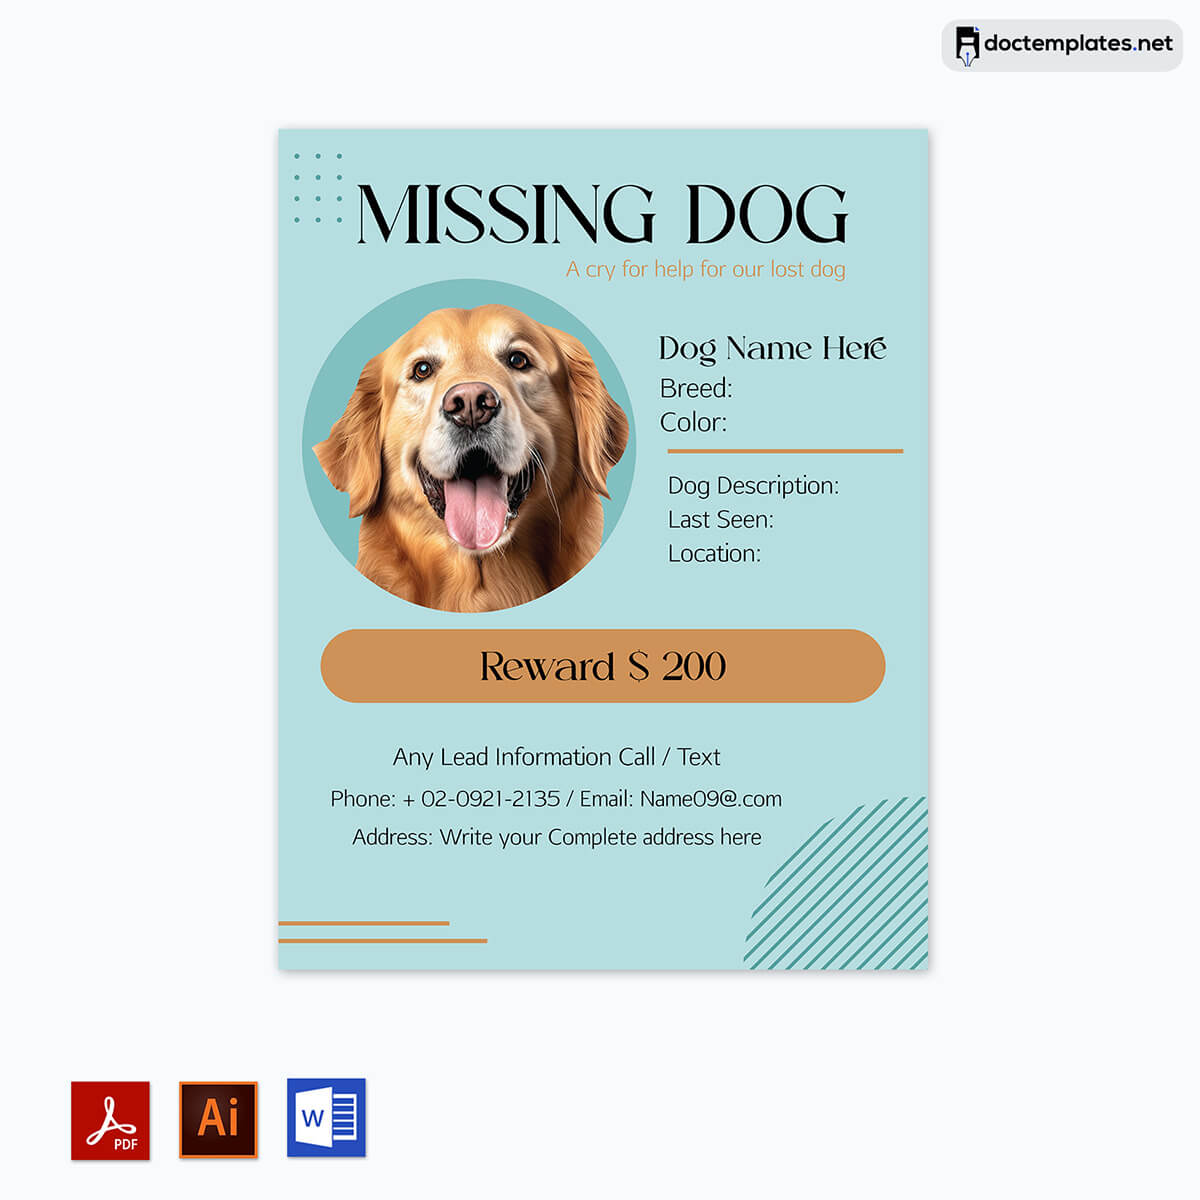 "Cat-Dog Lost Flyer Template" - A customizable template for creating a lost flyer for missing cats and dogs.